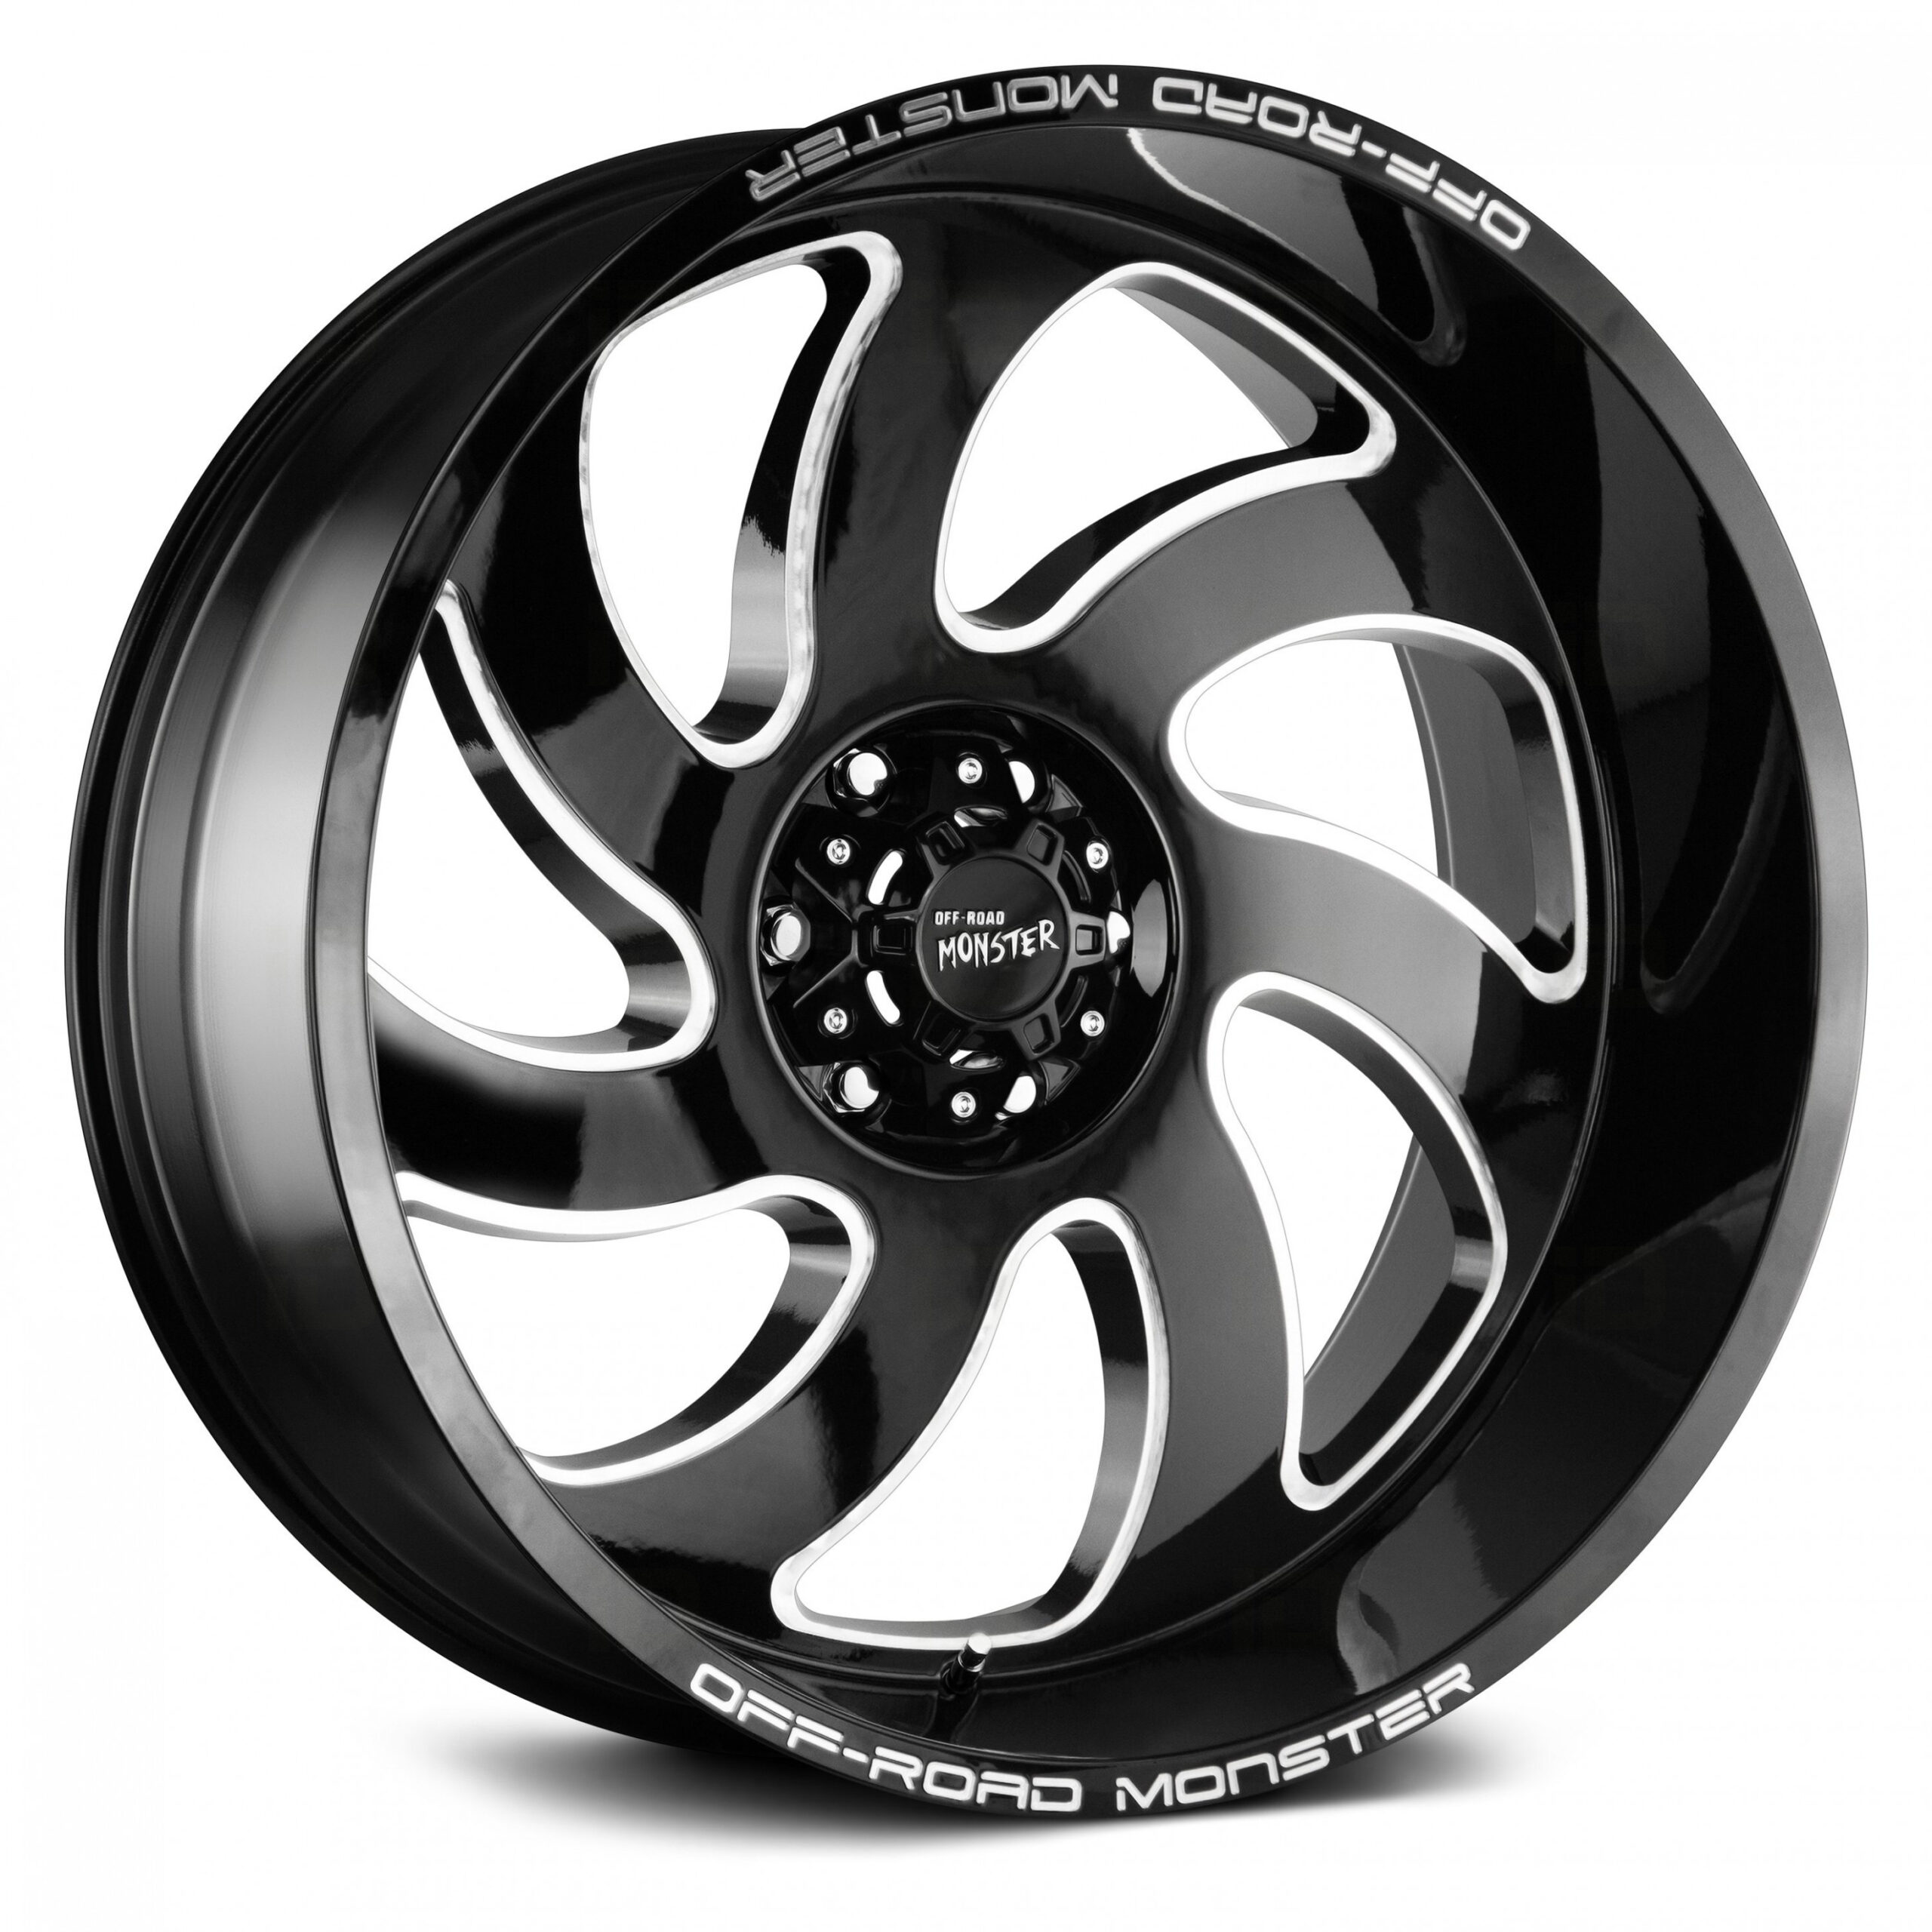 OFF-ROAD MONSTER® - M4 Gloss Black with Milled Accents - off road monster wheels